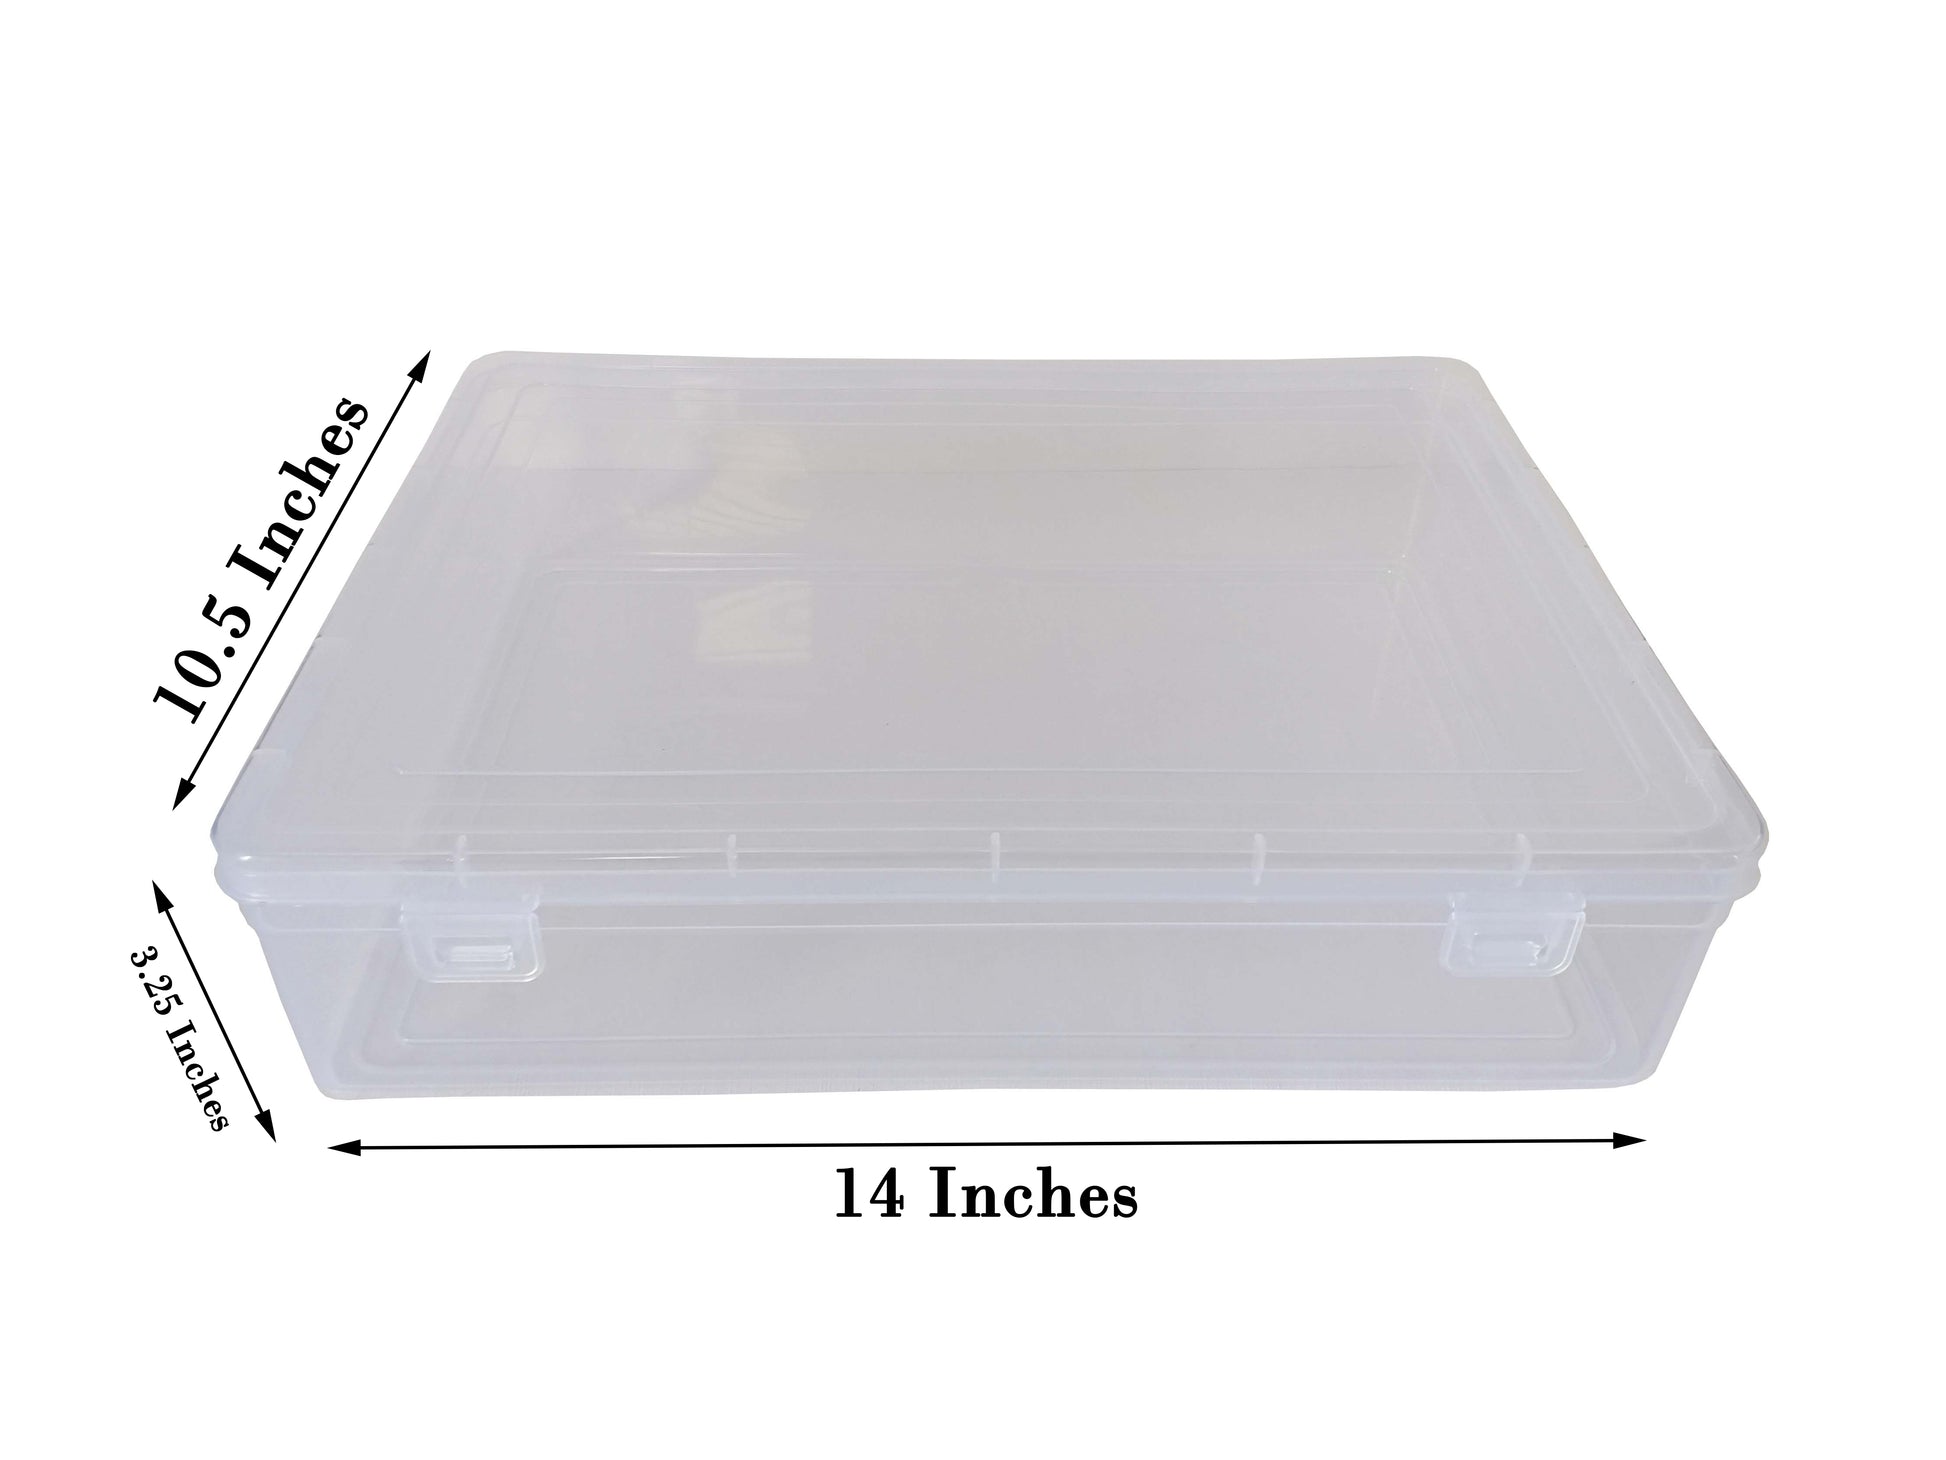 Clear Plastic Extra Large Storage Boxes Size 14x10.5x3.25 Inches (Set of 3)